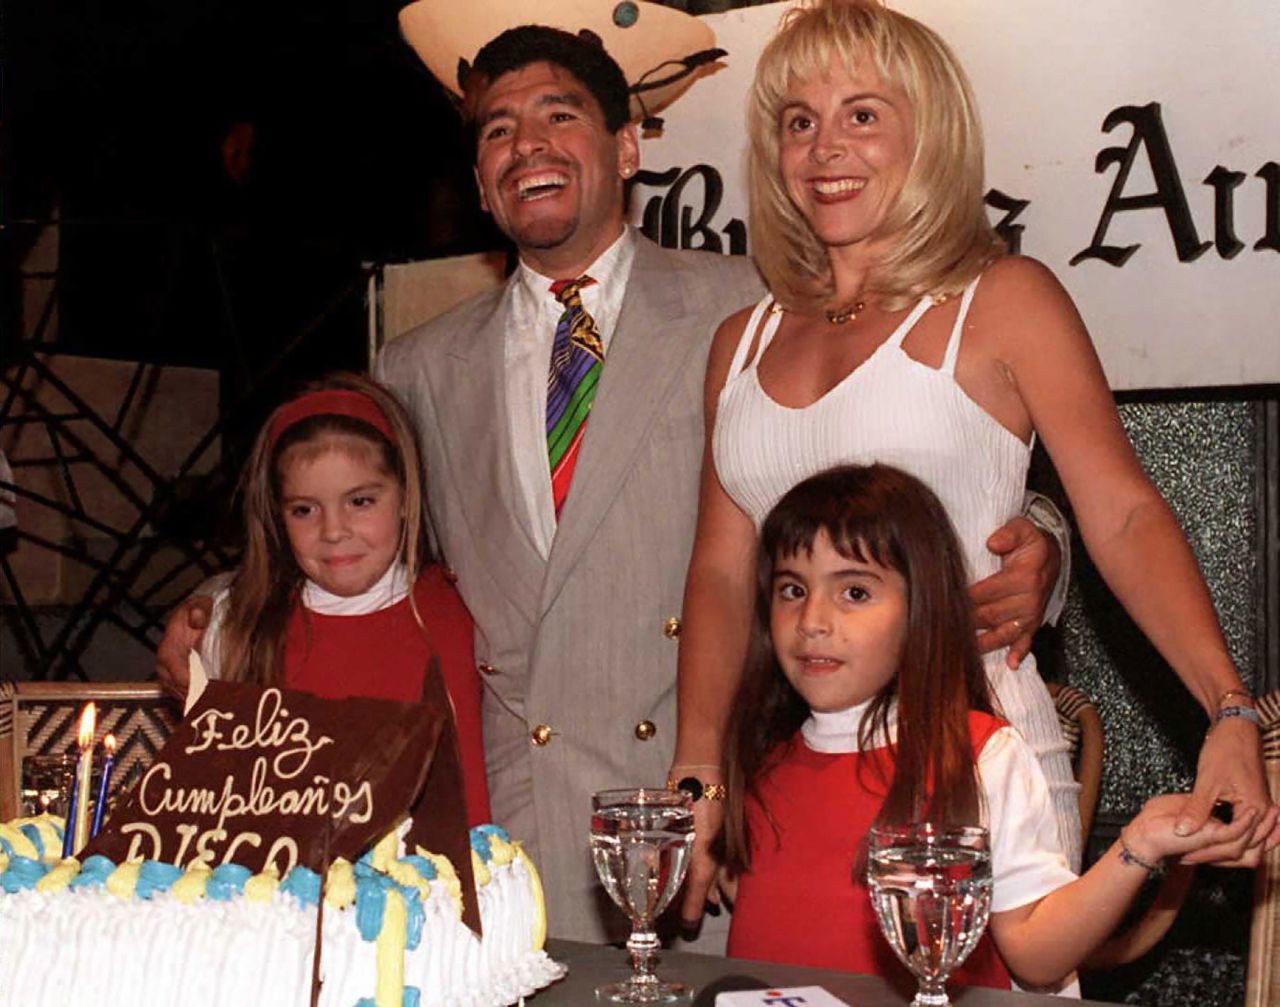 Maradona is joined by his wife, Claudia, and their daughters Giannina, left, and Dalma while celebrating his 35th birthday in 1995.